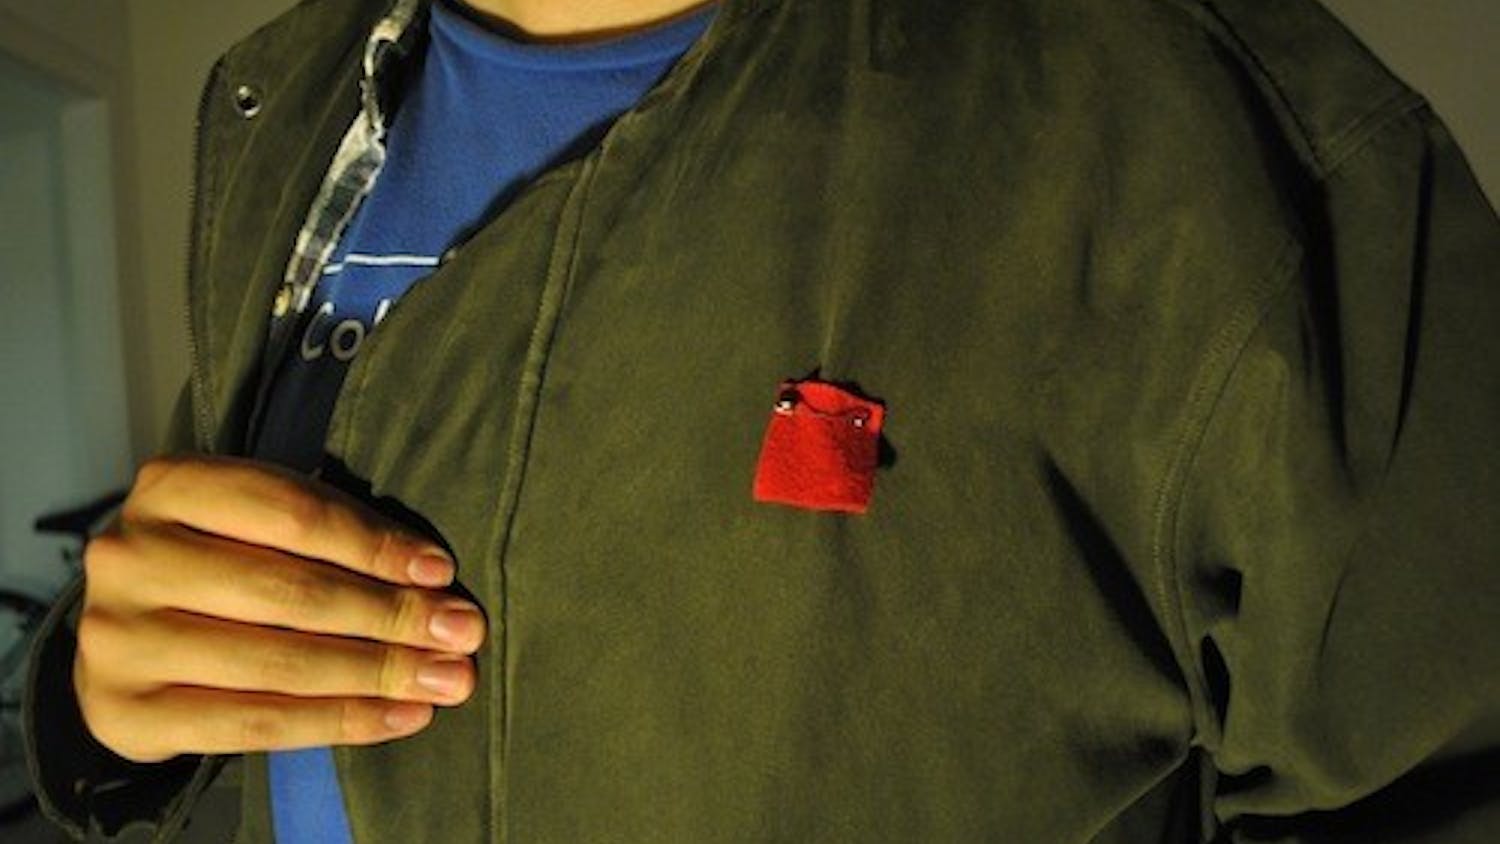 CAUS member Jack Kiraly wears a red felt square, modeled after squares worn by Québécois students worn during protest against tution hikes in Canada.